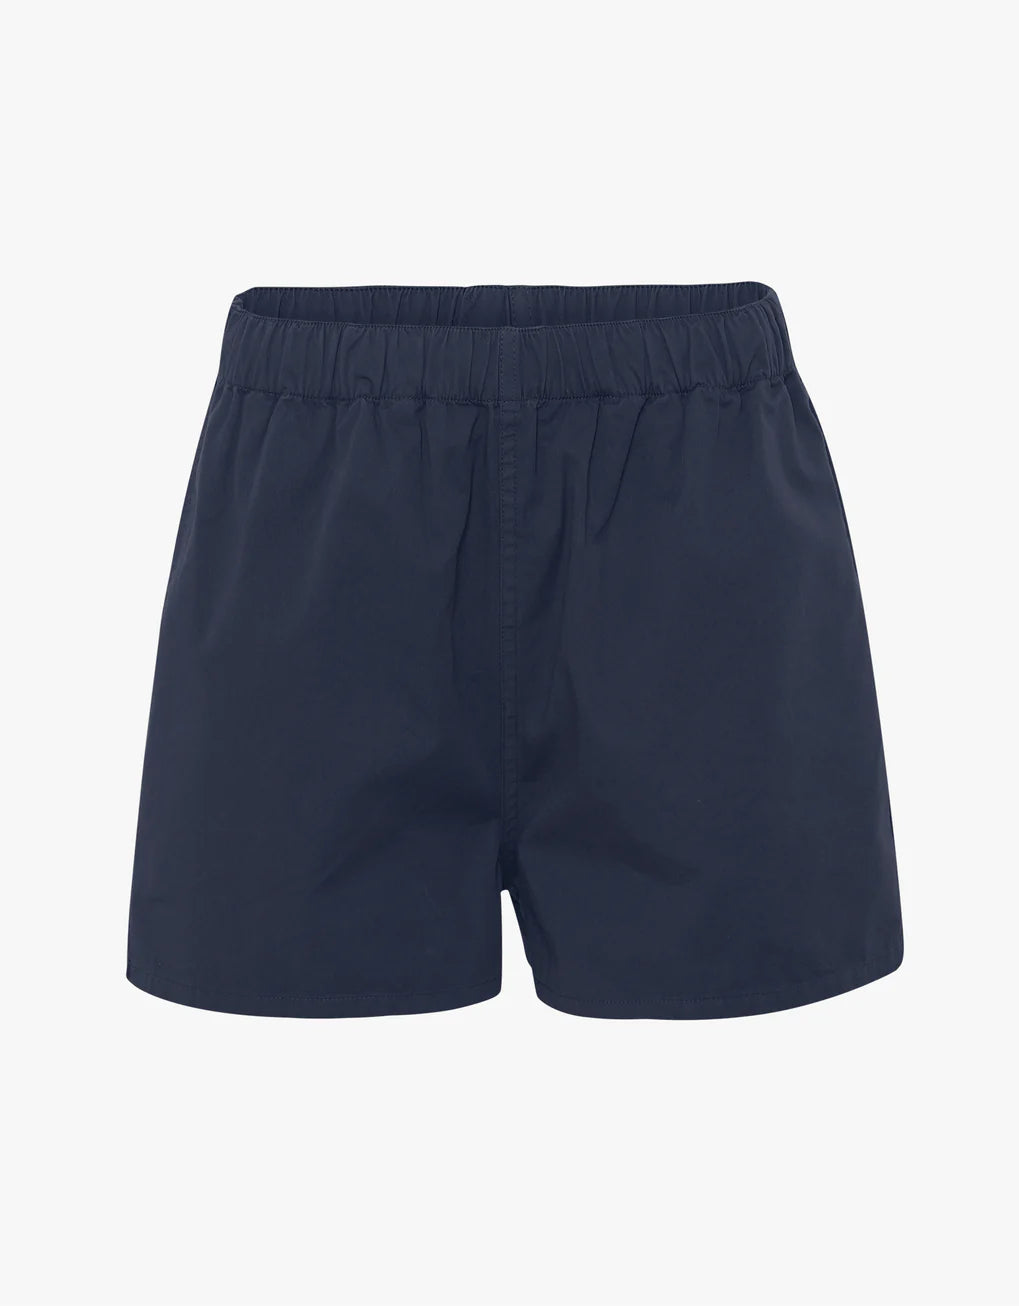 Navy blue, durable Colorful Standard Organic Twill Shorts with an elastic waistband, made from 100% organic cotton twill.